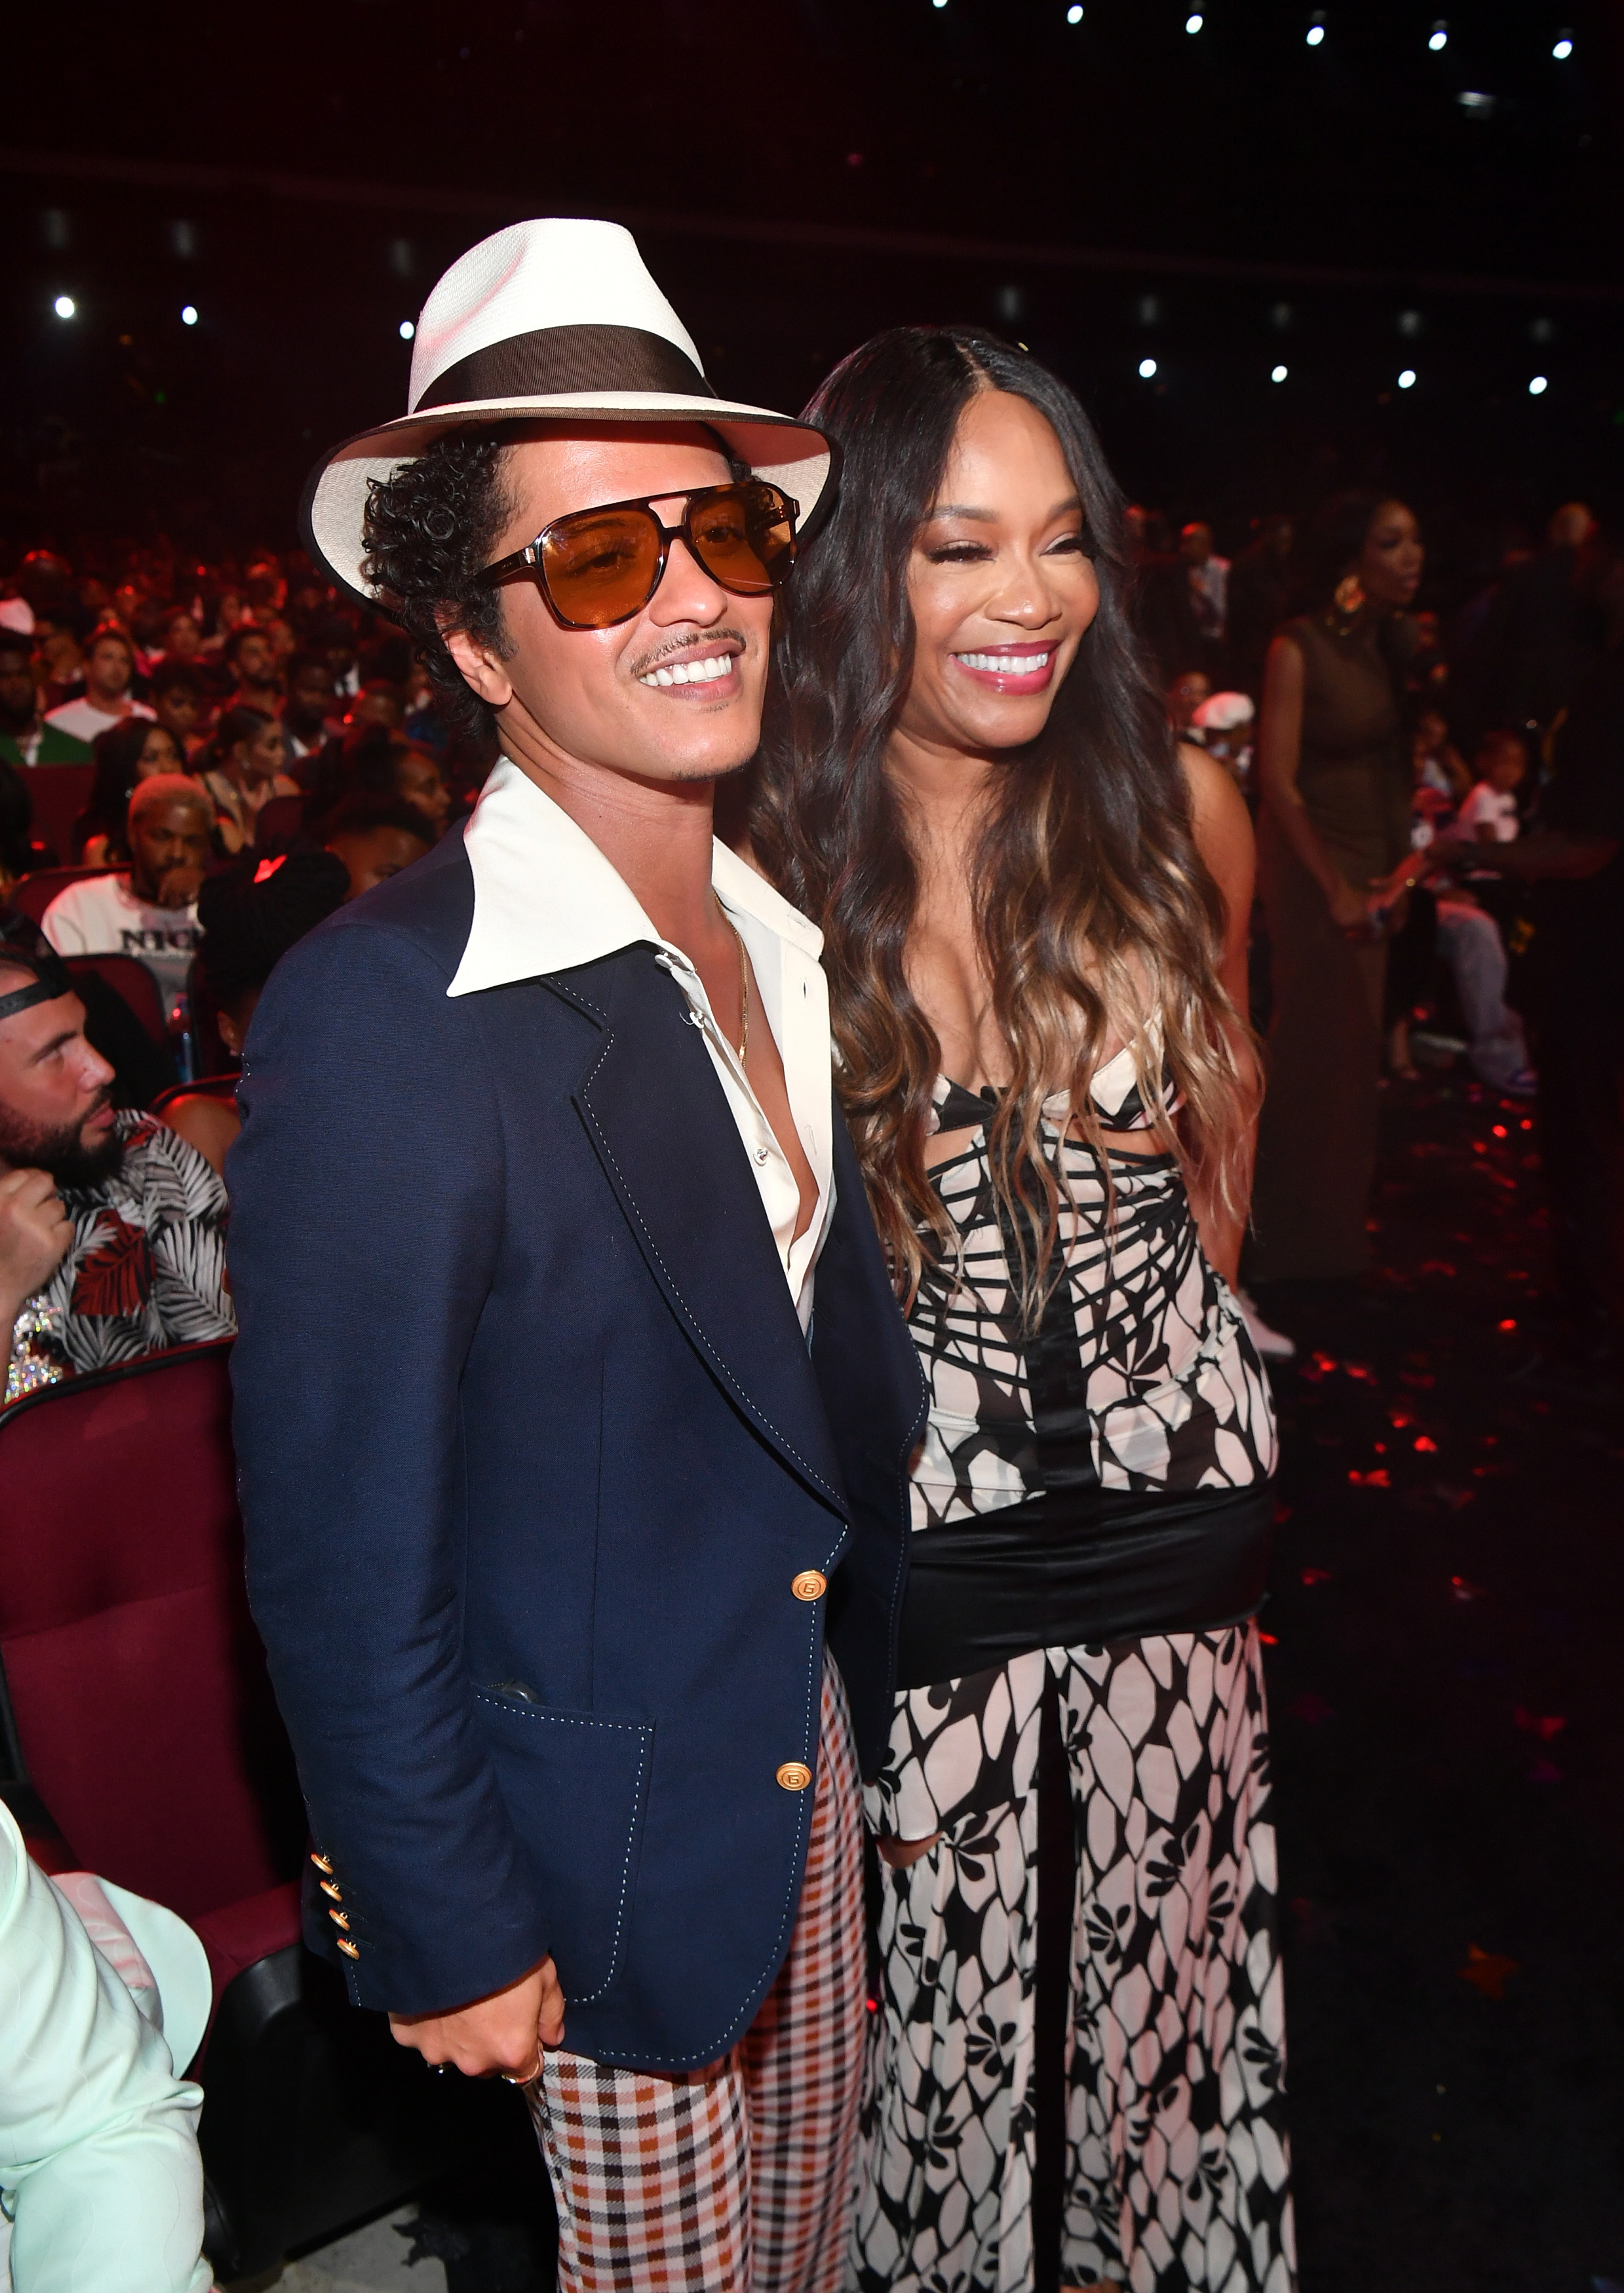 Bruno Mars, who was nominated for categories with the SilkSonic group, was present at the awards (Photo: Getty Images)